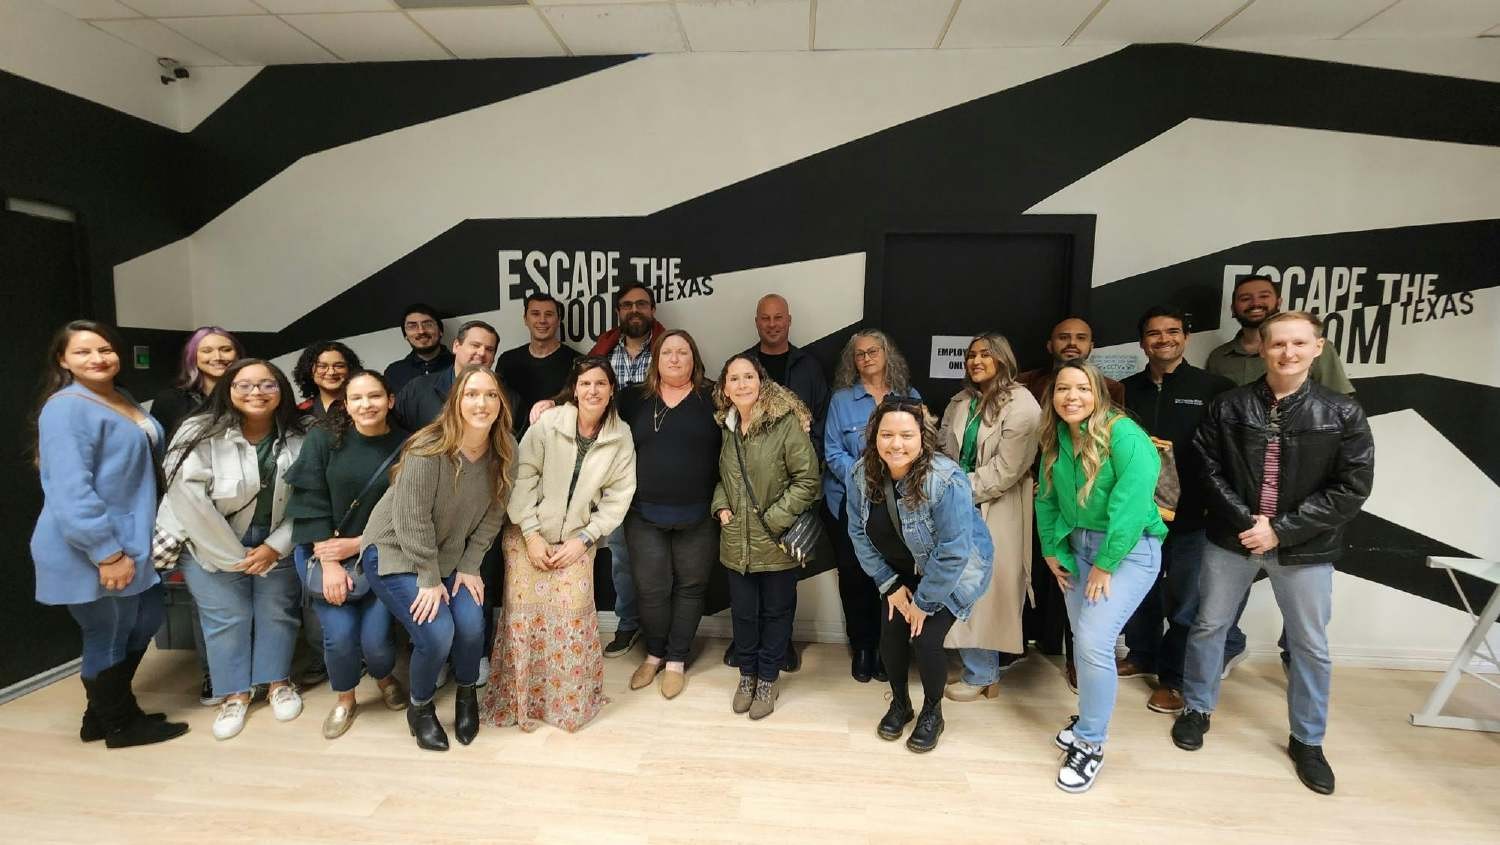 On St. Patrick's Day, our Houston team got together for dinner and a team-building activity at Escape the Room! 